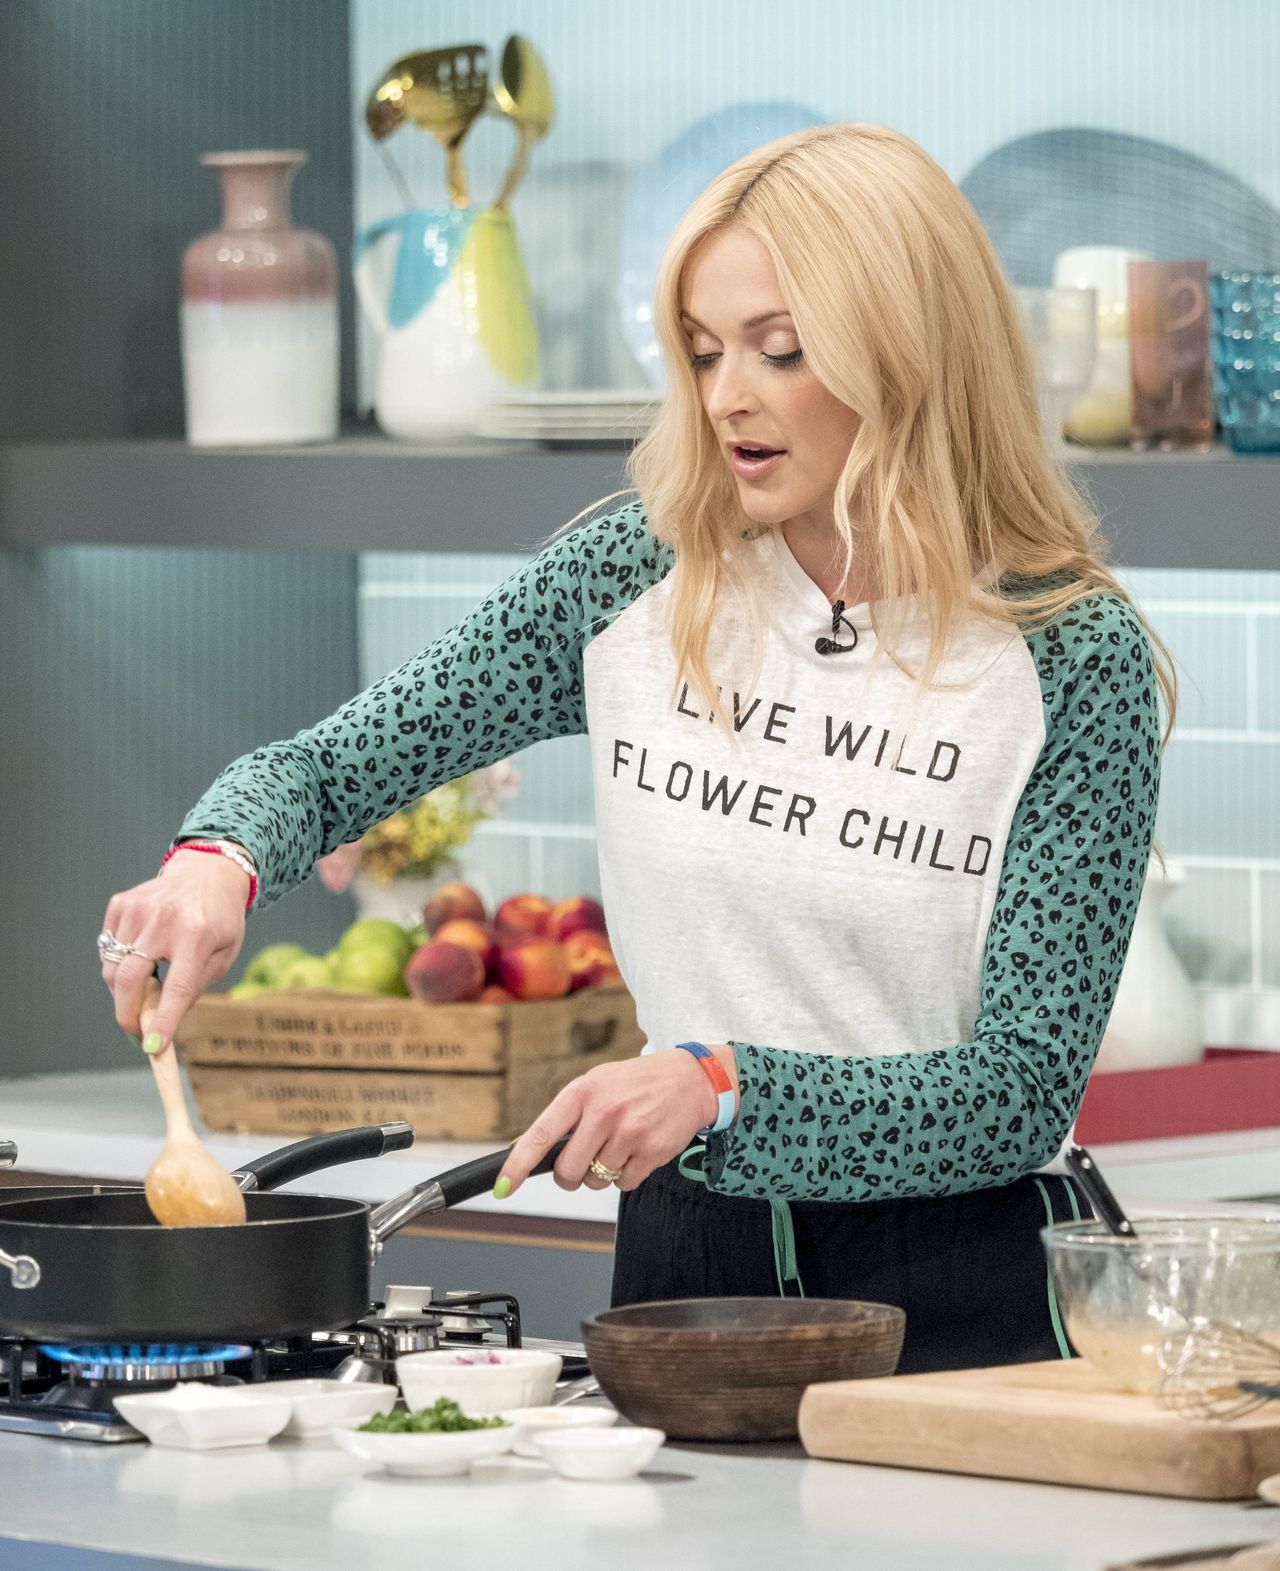 Fearne has discovered a love of cookery in recent years